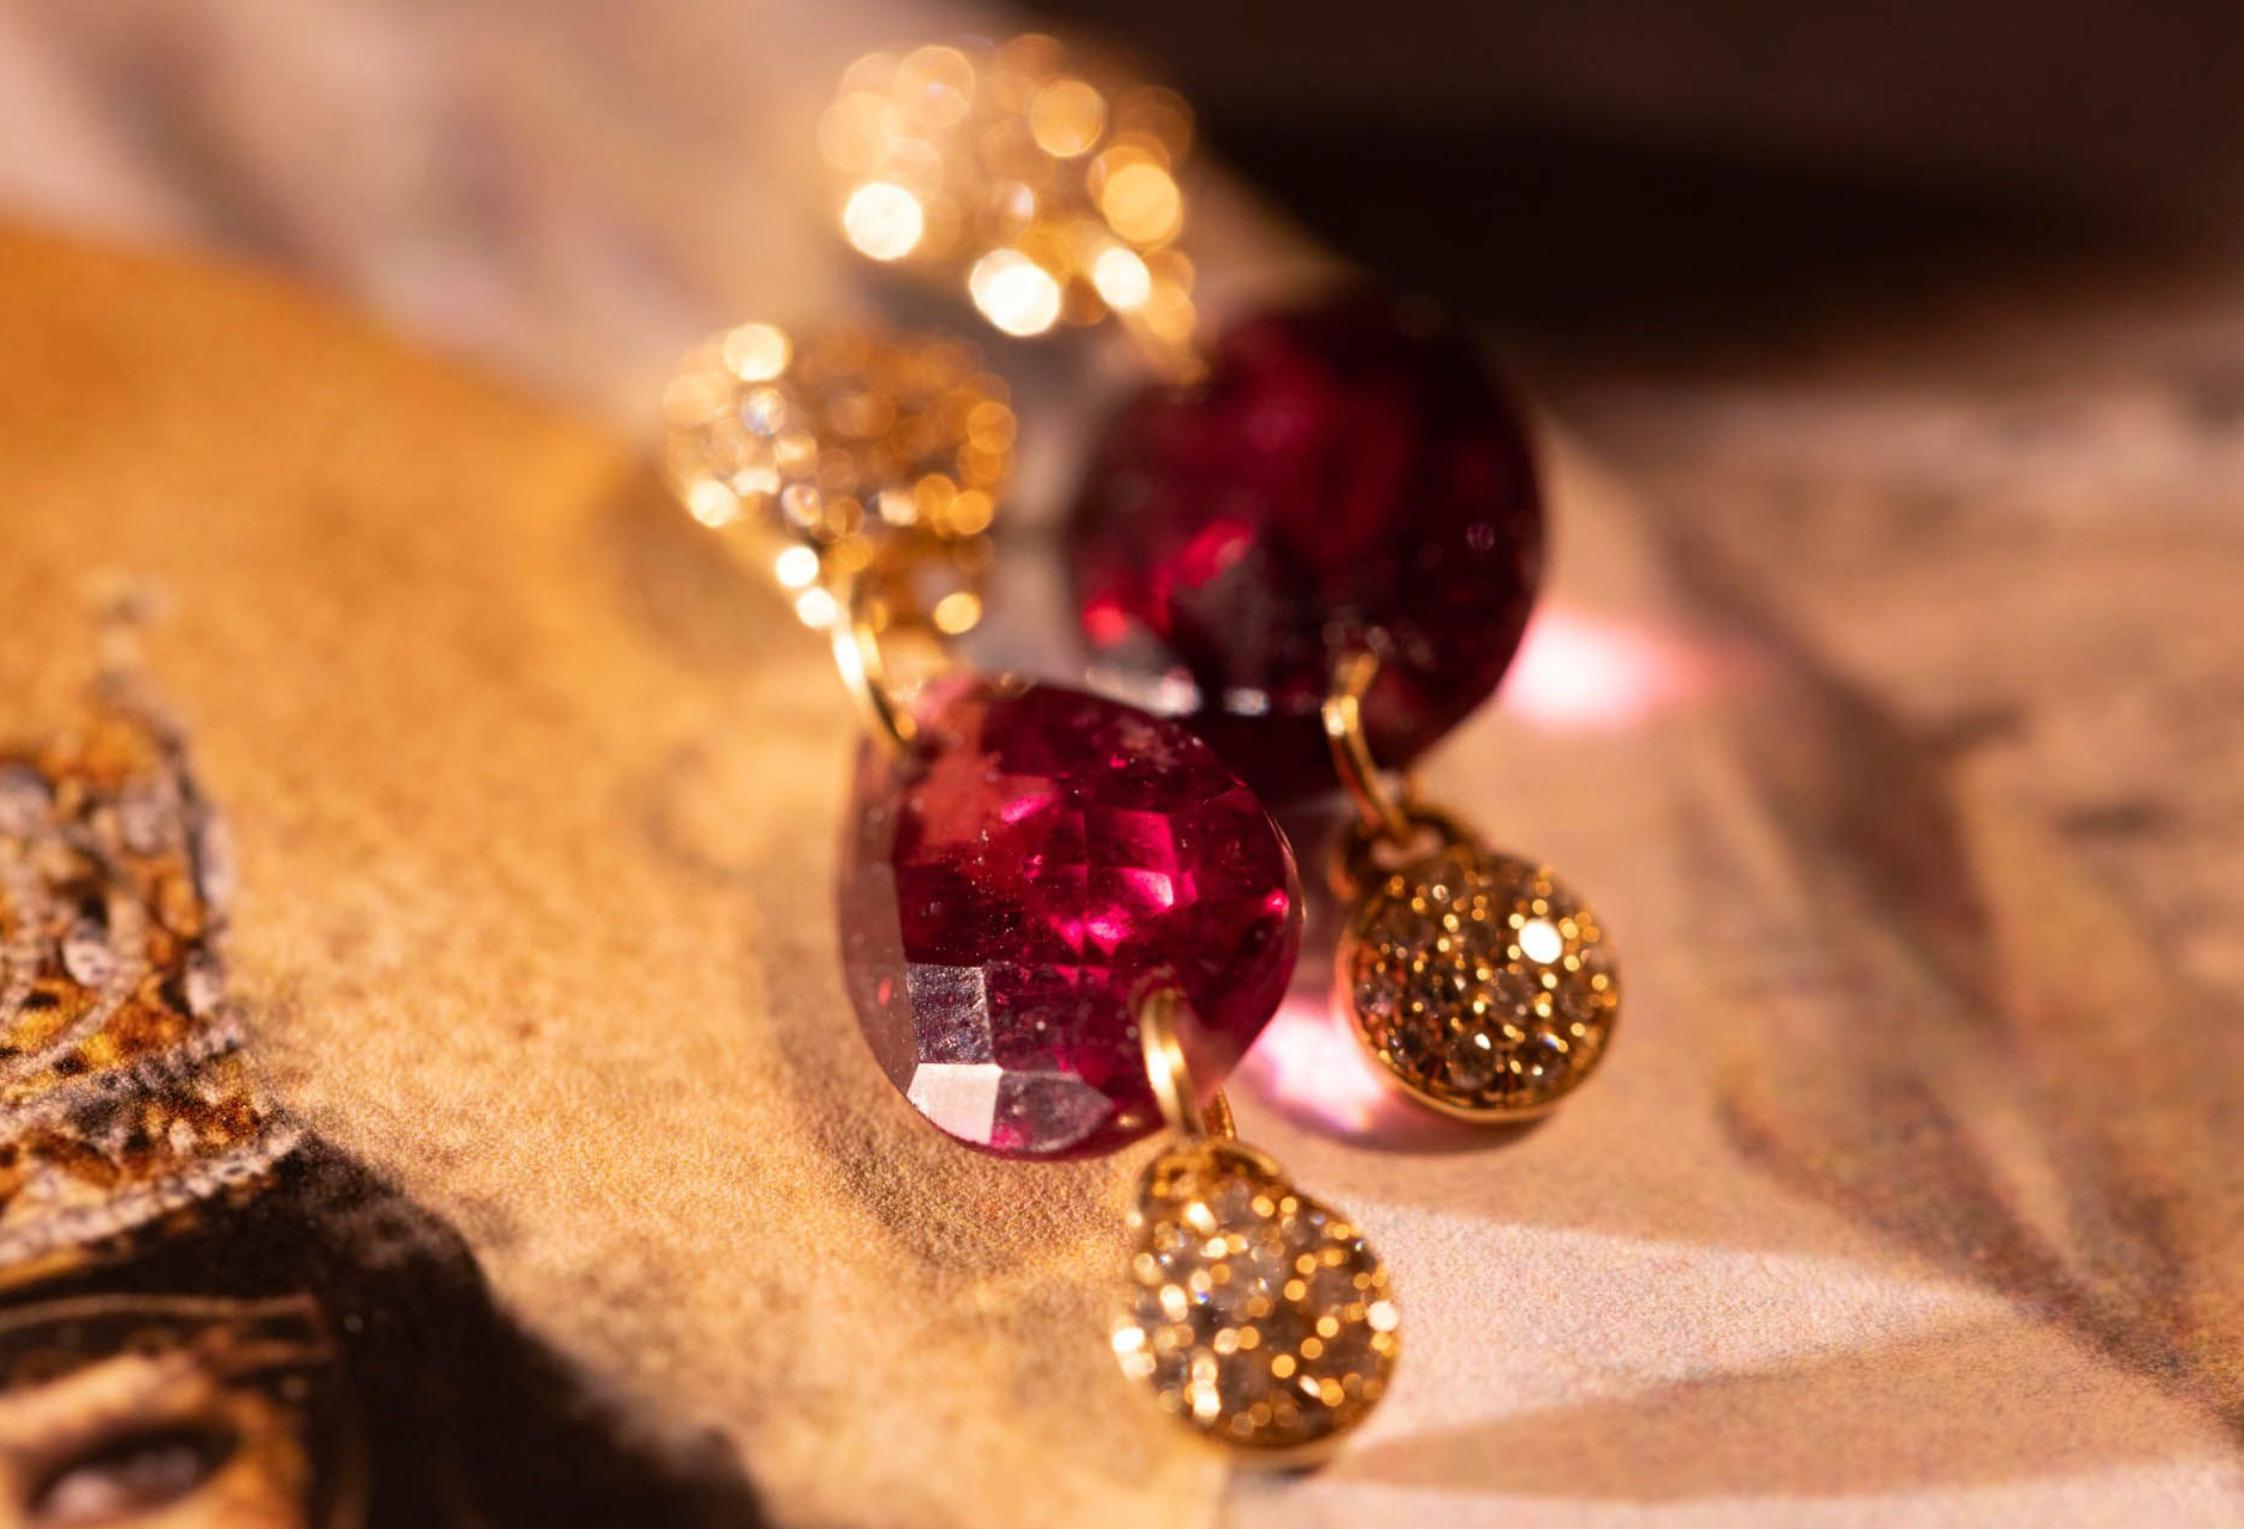 Brilliant Cut Paris & Lily, handmade, 18K yellow gold earrings with pave diamonds and garnets